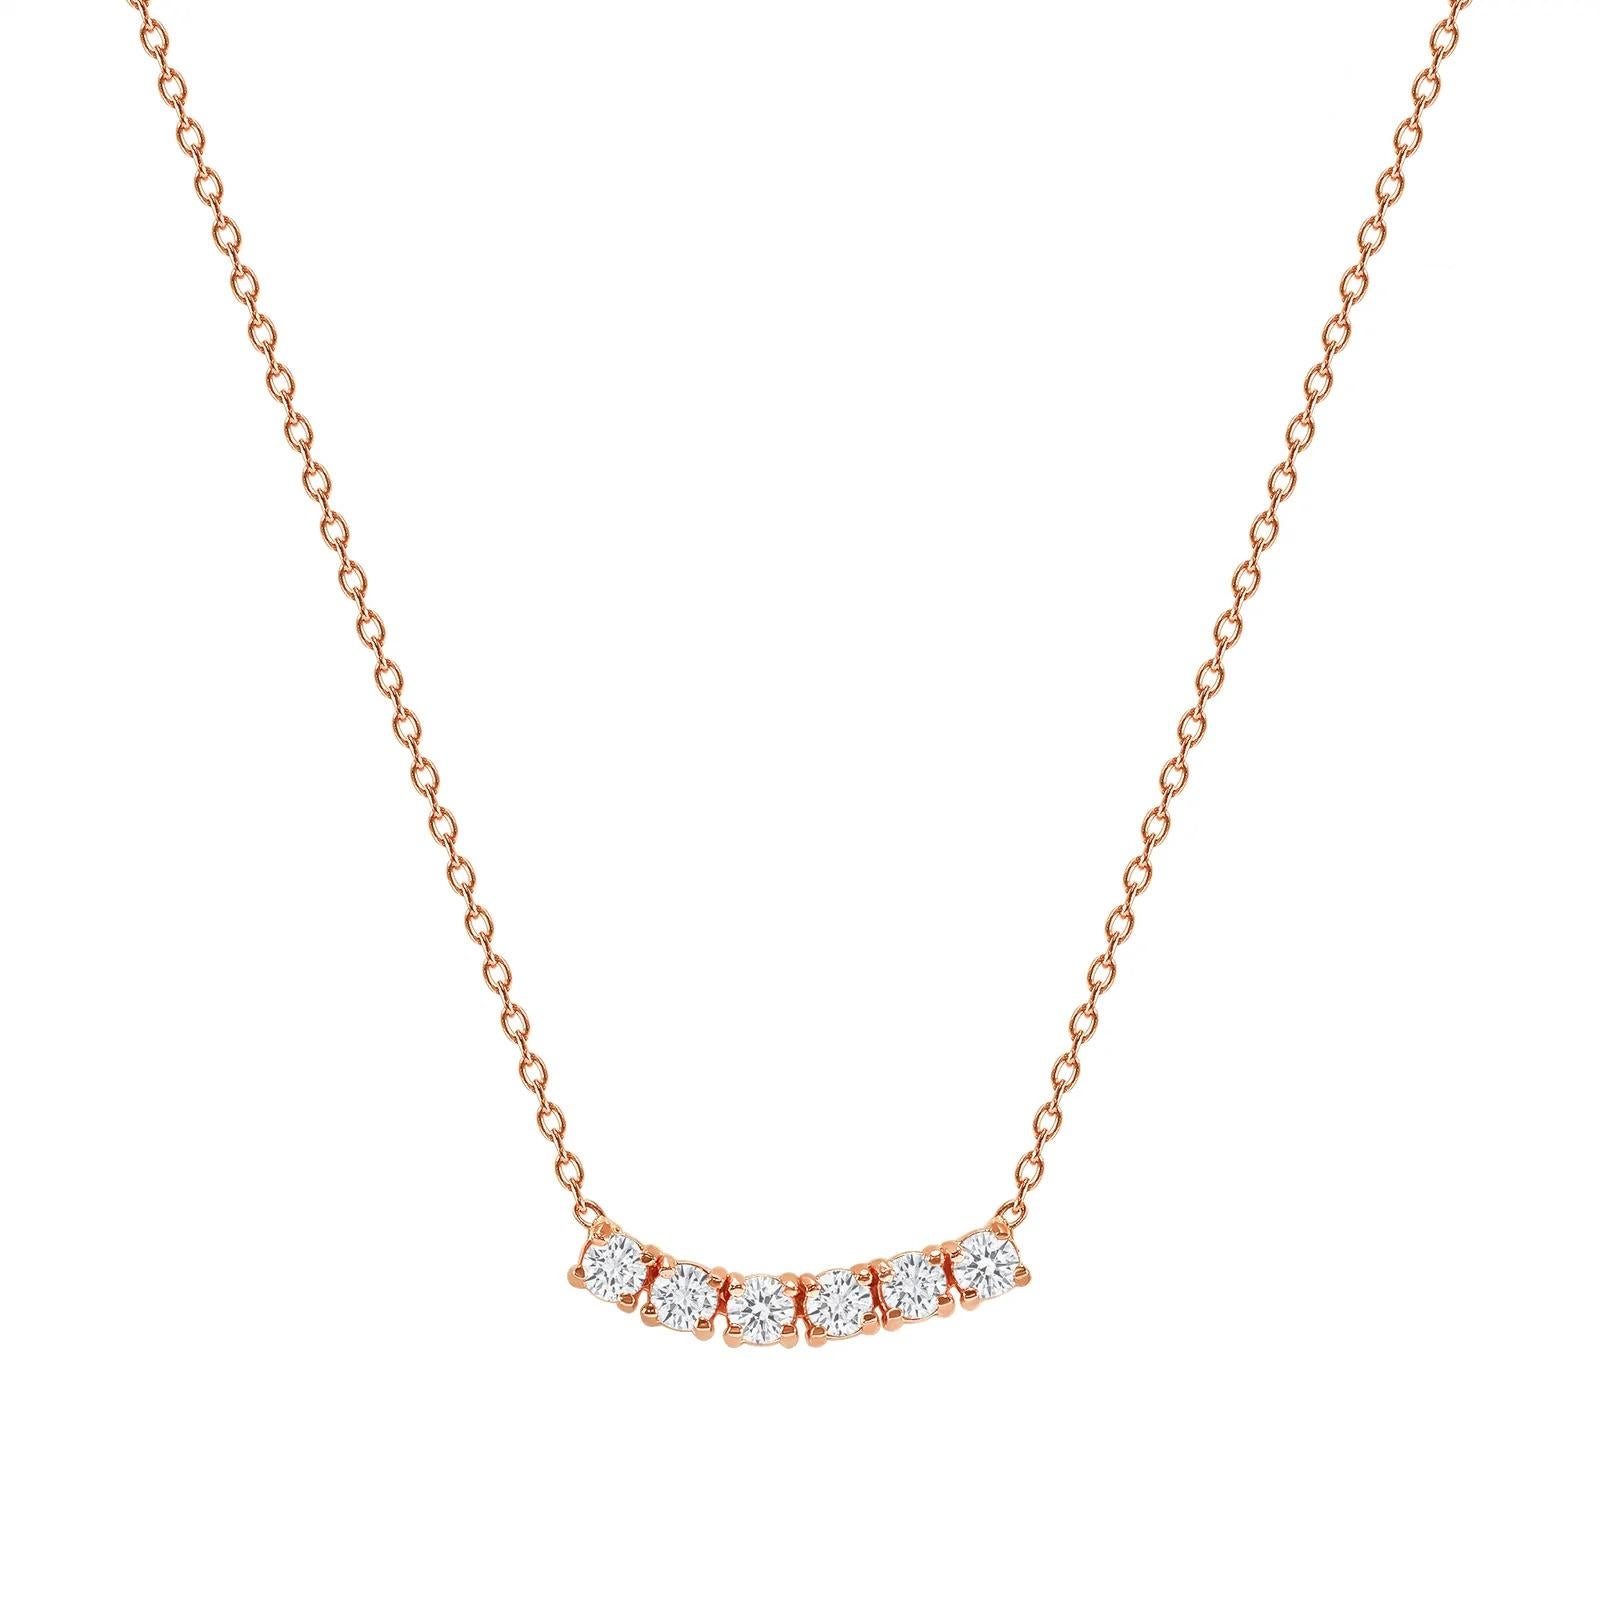 This petite, curved diamond necklace is crafted with gorgeous 14k gold set with six round diamonds.  

Gold: 14k 
Diamond Total Carats: 0.75 ct
Diamond Cut: Round (6 diamonds)
Diamond Clarity: VS
Diamond Color: F
Color: Rose Gold
Necklace Length: 24